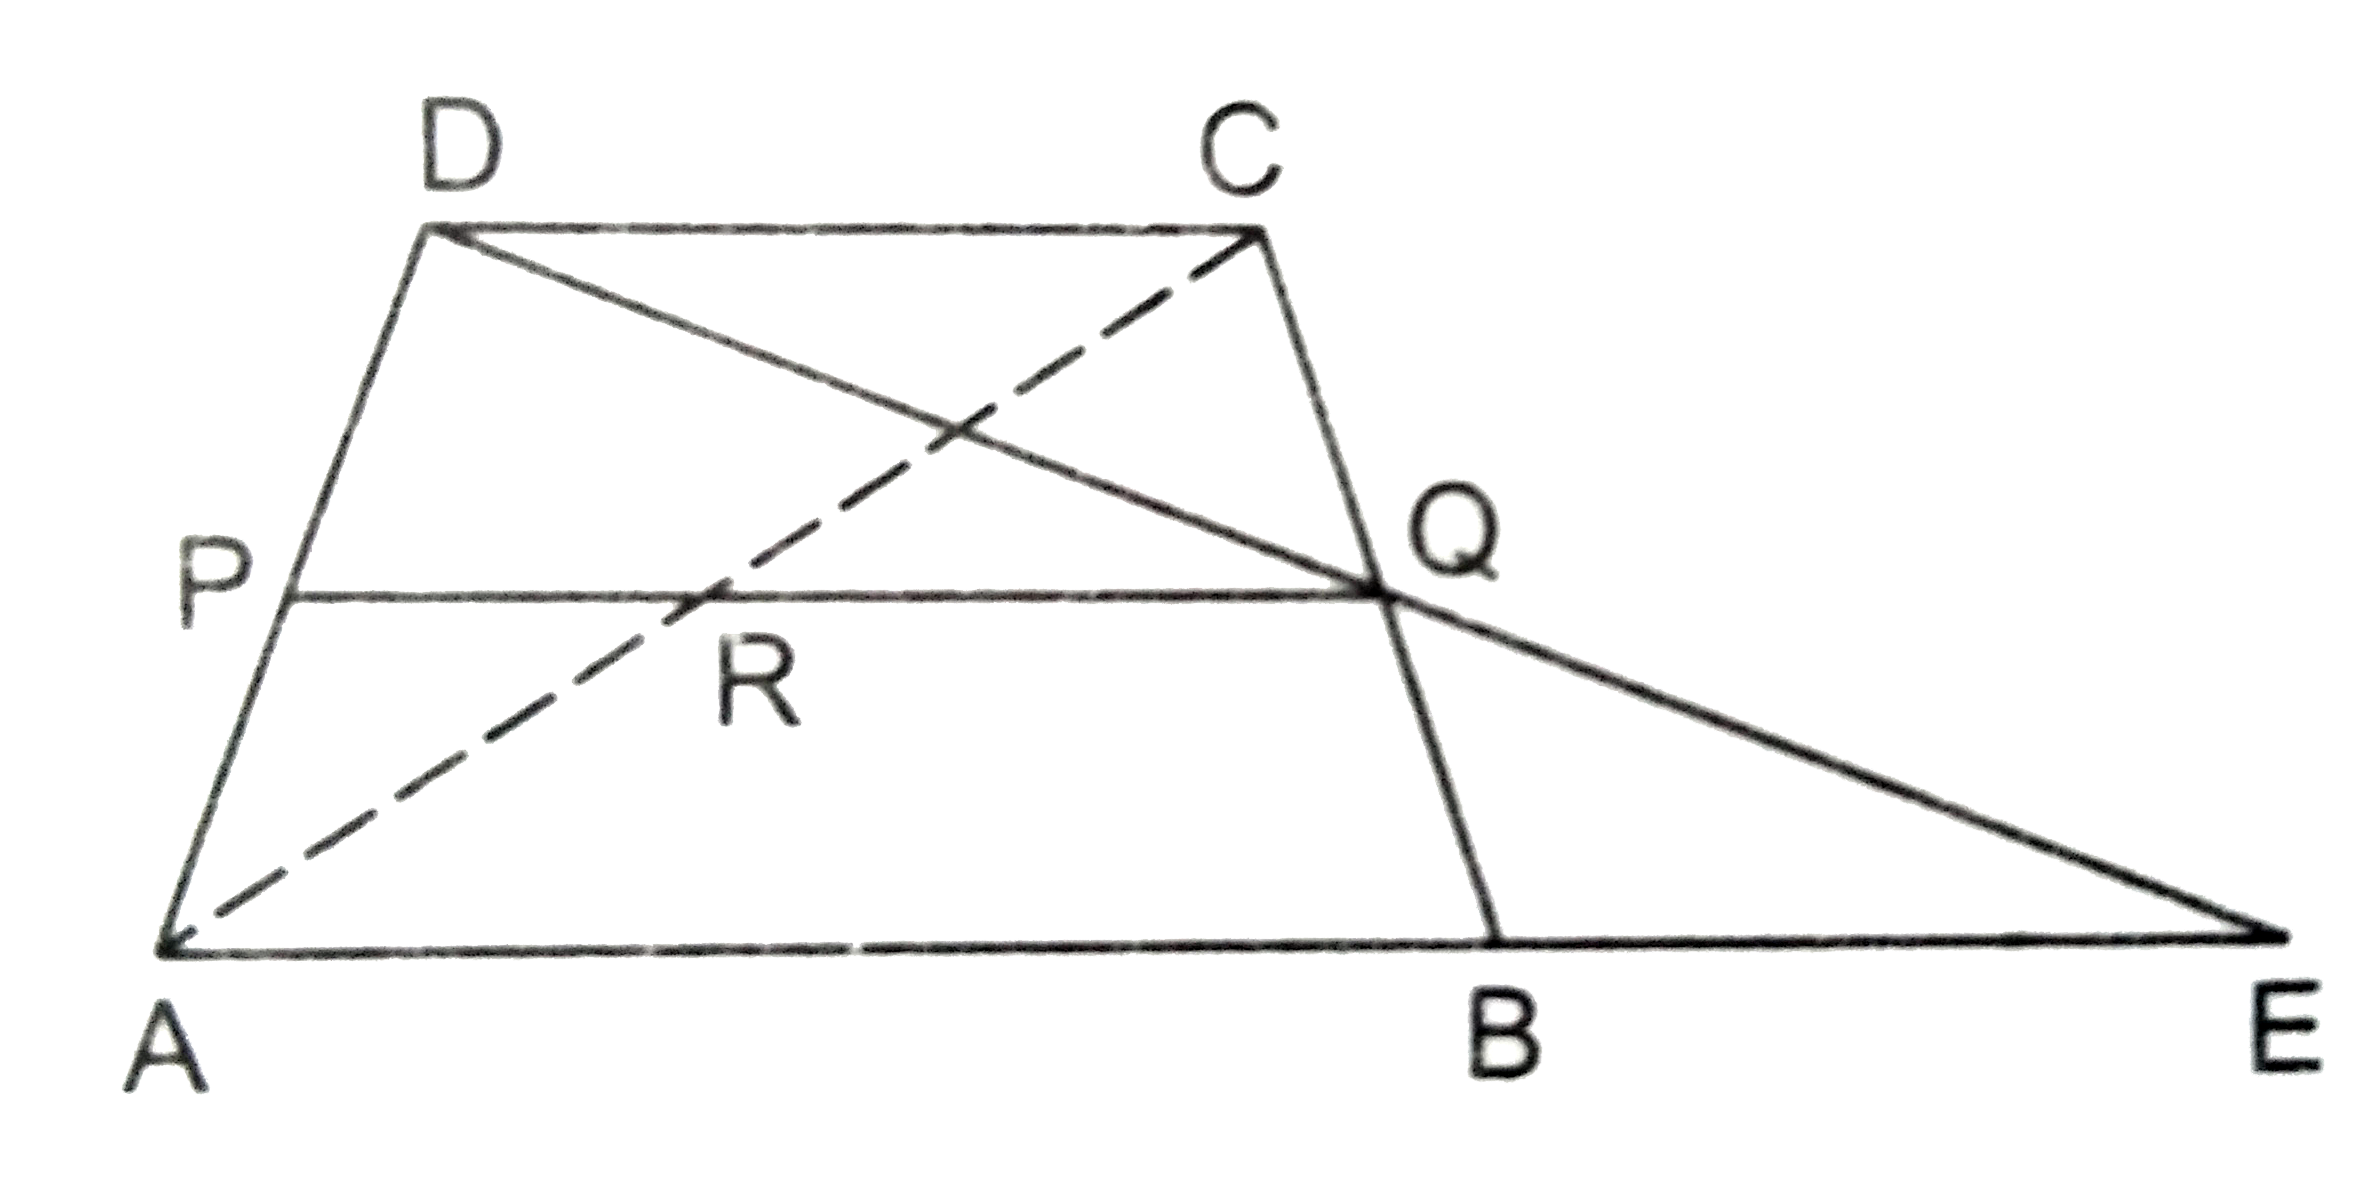 In the adjoining figure, ABCD is a trapezium  in which  AB||DC and  P, Q are the midpoints of AD and BC respectively. DQ and AB  when produced meet at E. Also, AC and PQ intersect at R. Prove that (i) DQ = QE, (ii)  PR||AB and  (iii) AR = RC.